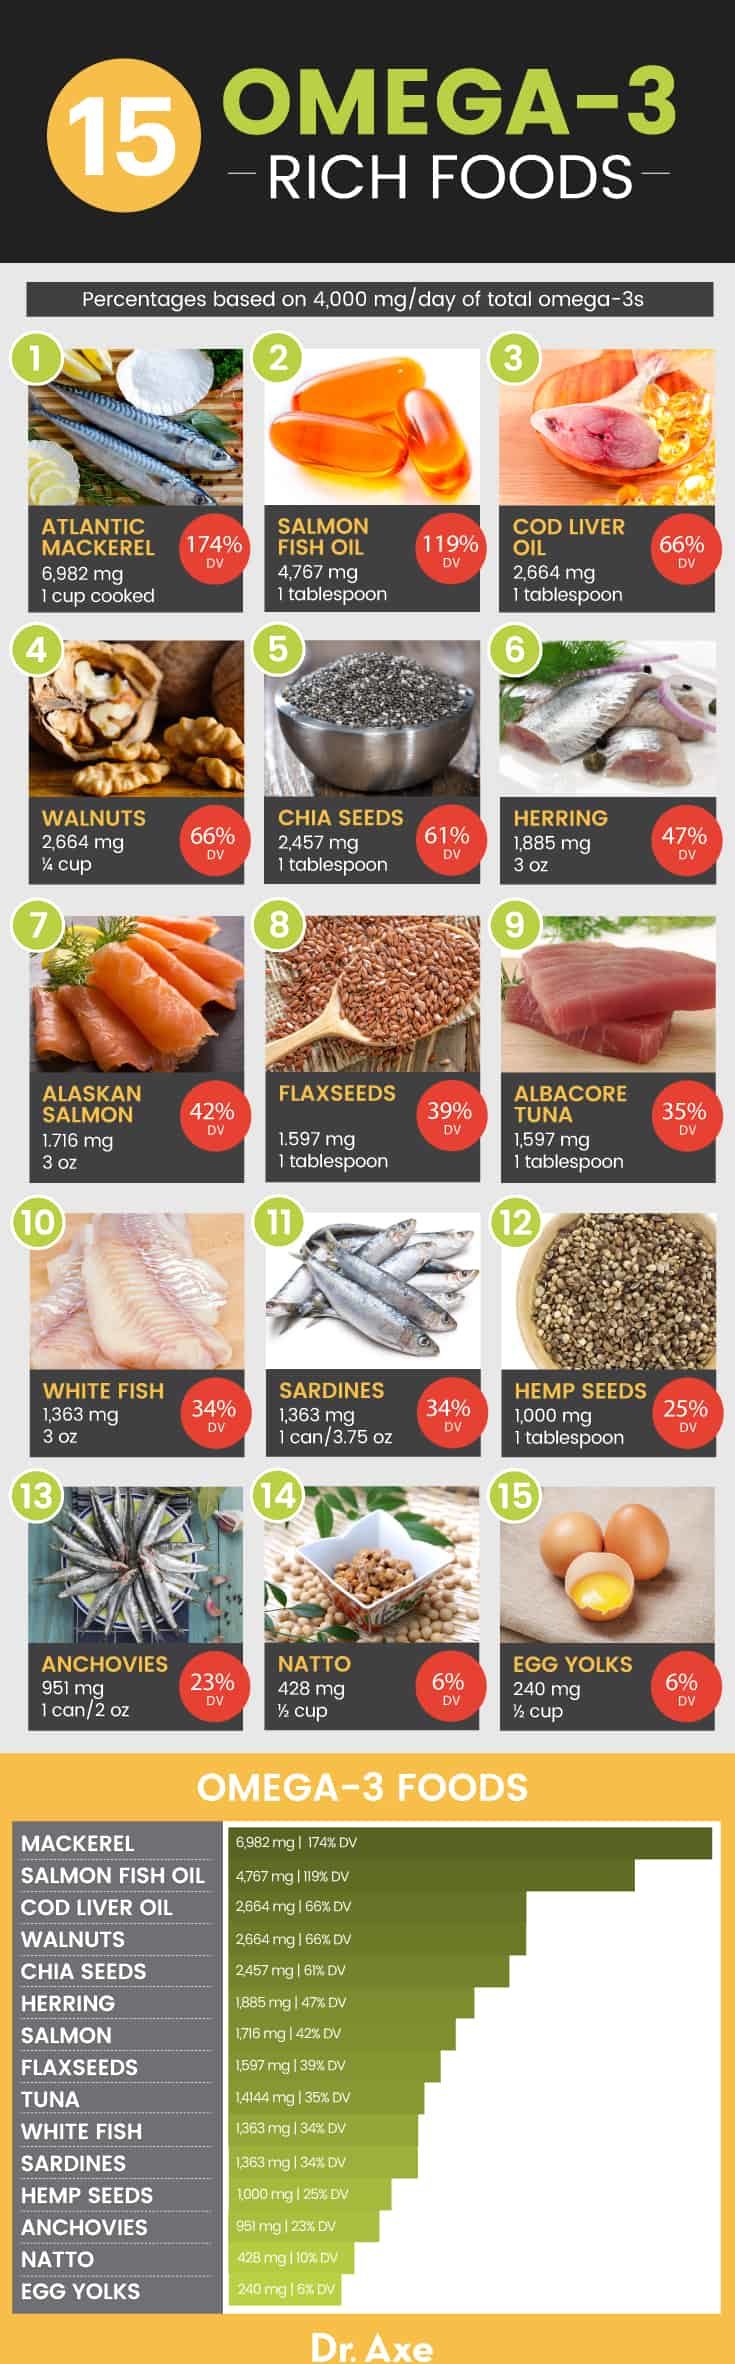 Omega-3 foods - Dr. Axe